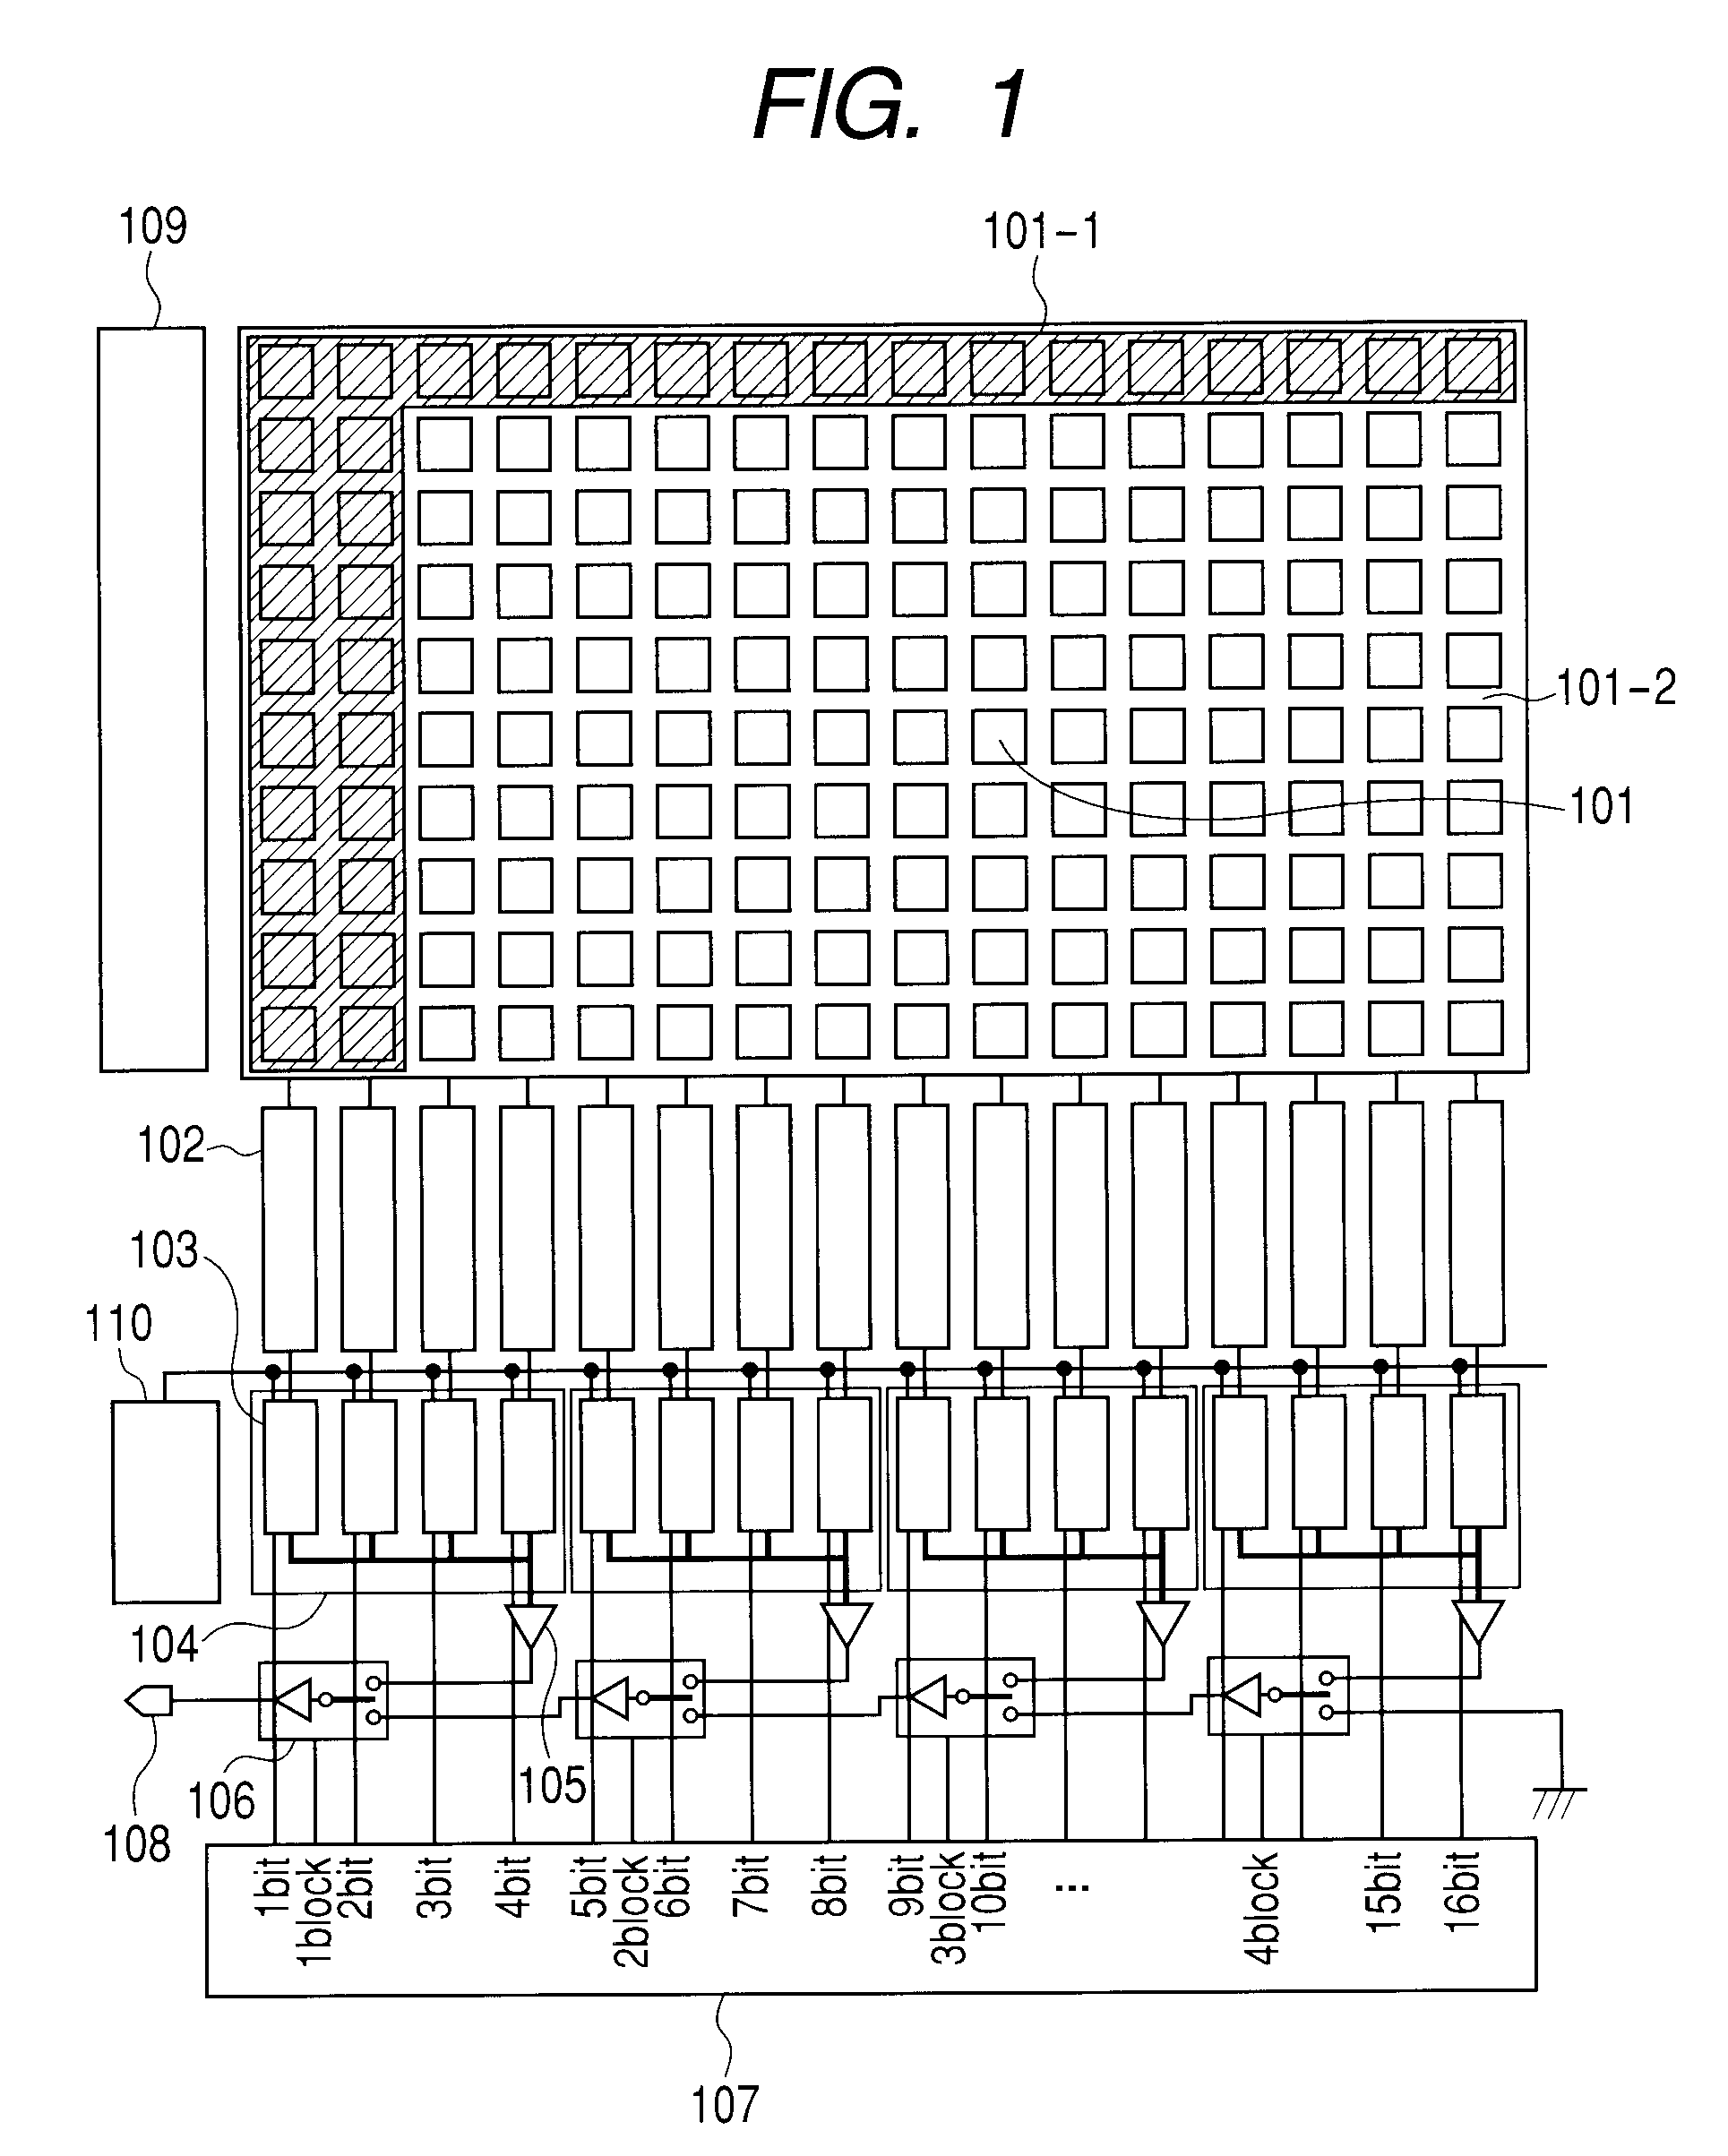 Solid-state imaging apparatus including pixel matrix with selectable blocks of output lines and imaging system using the solid-state imaging apparatus